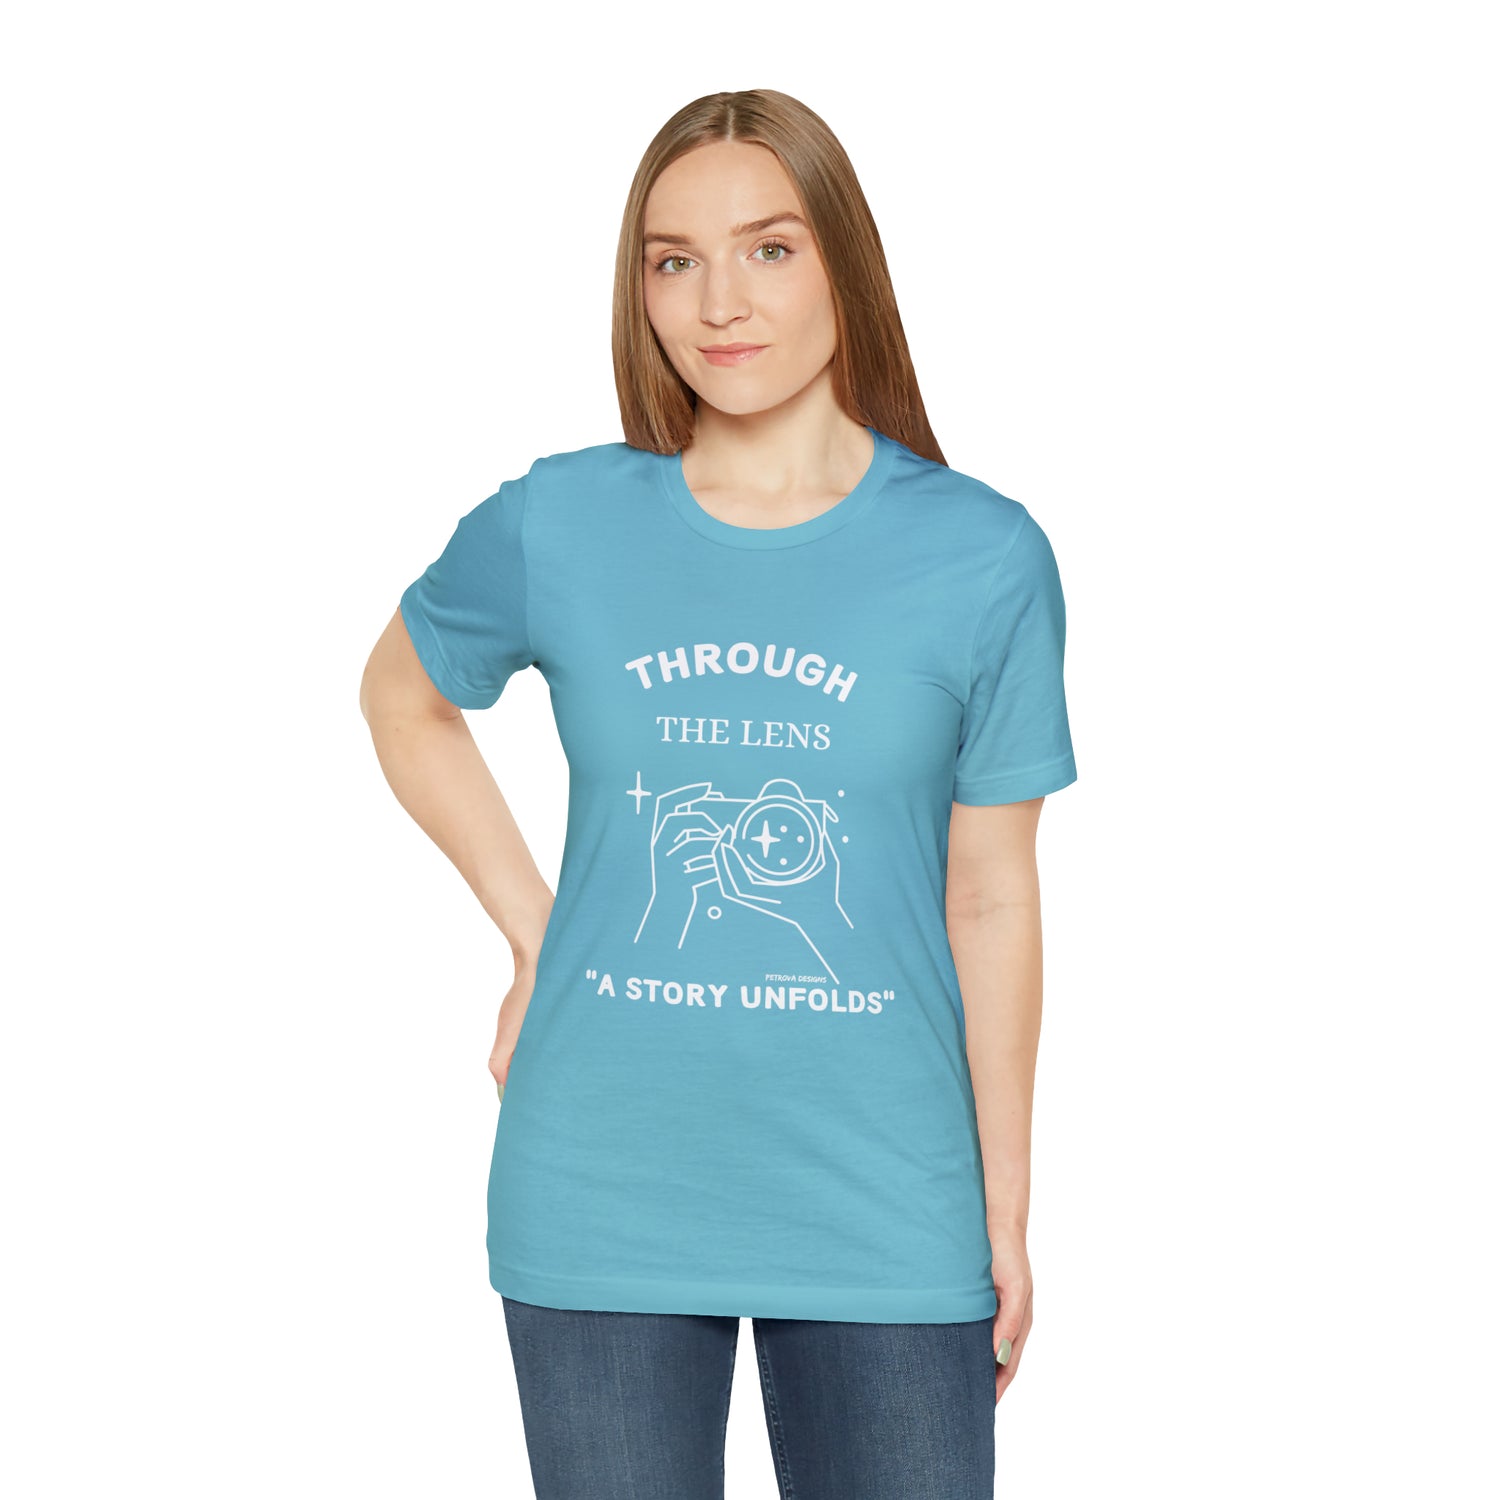 Turquoise T-Shirt Tshirt Design Gift for Friend and Family Short Sleeved Shirt Petrova Designs